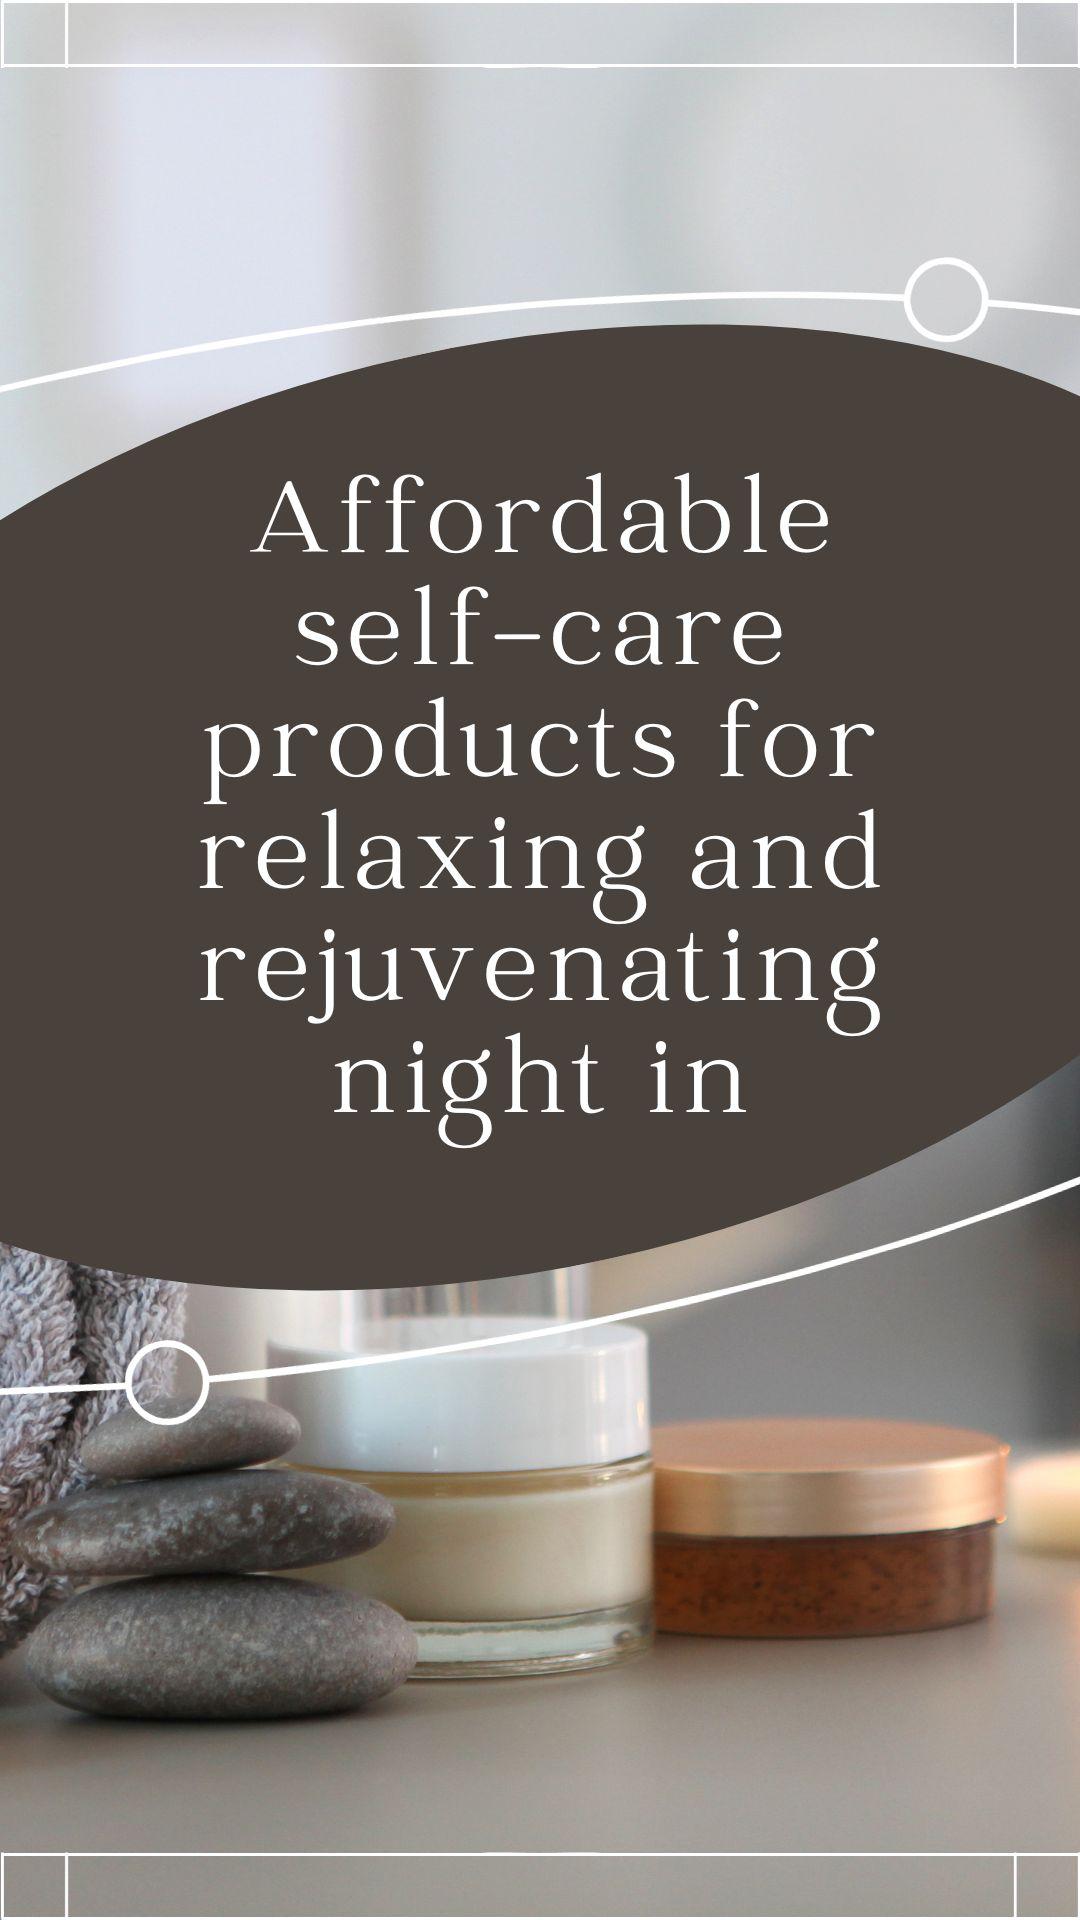 Affordable self-care products for relaxing and rejuvenating night in